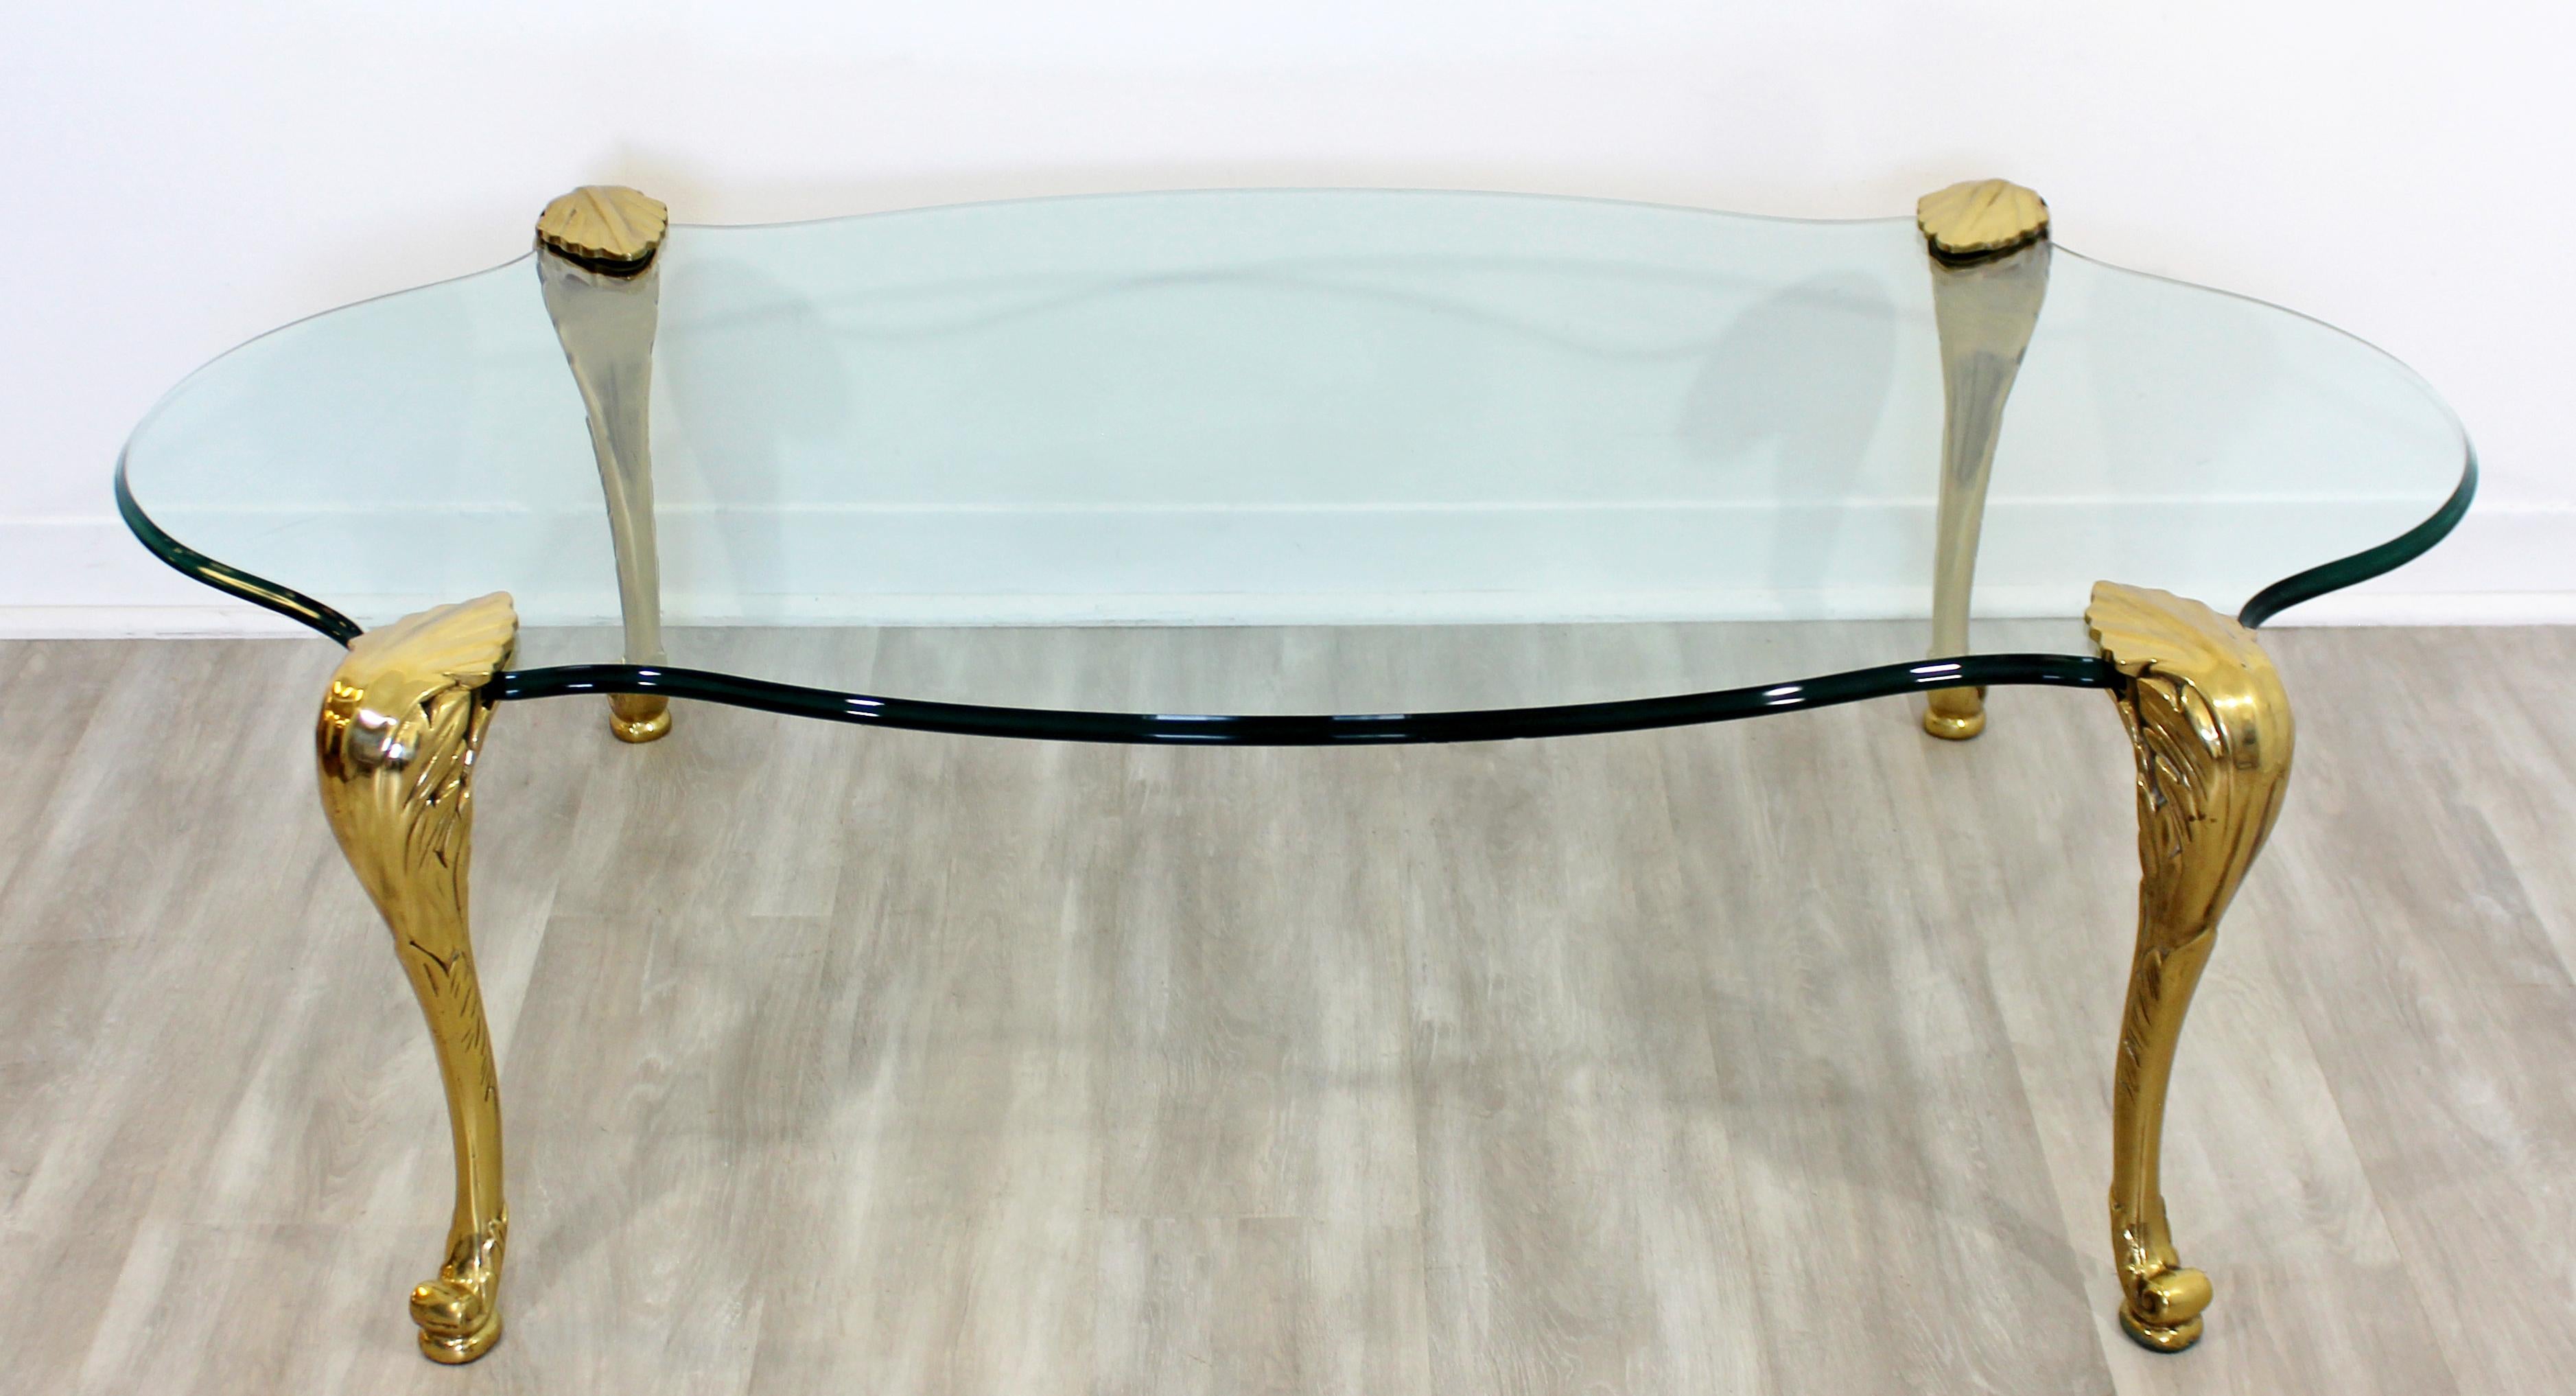 American Mid-Century Modern P.E. Guerin Attr. Brass and Glass Sculpted Coffee Table 1950s